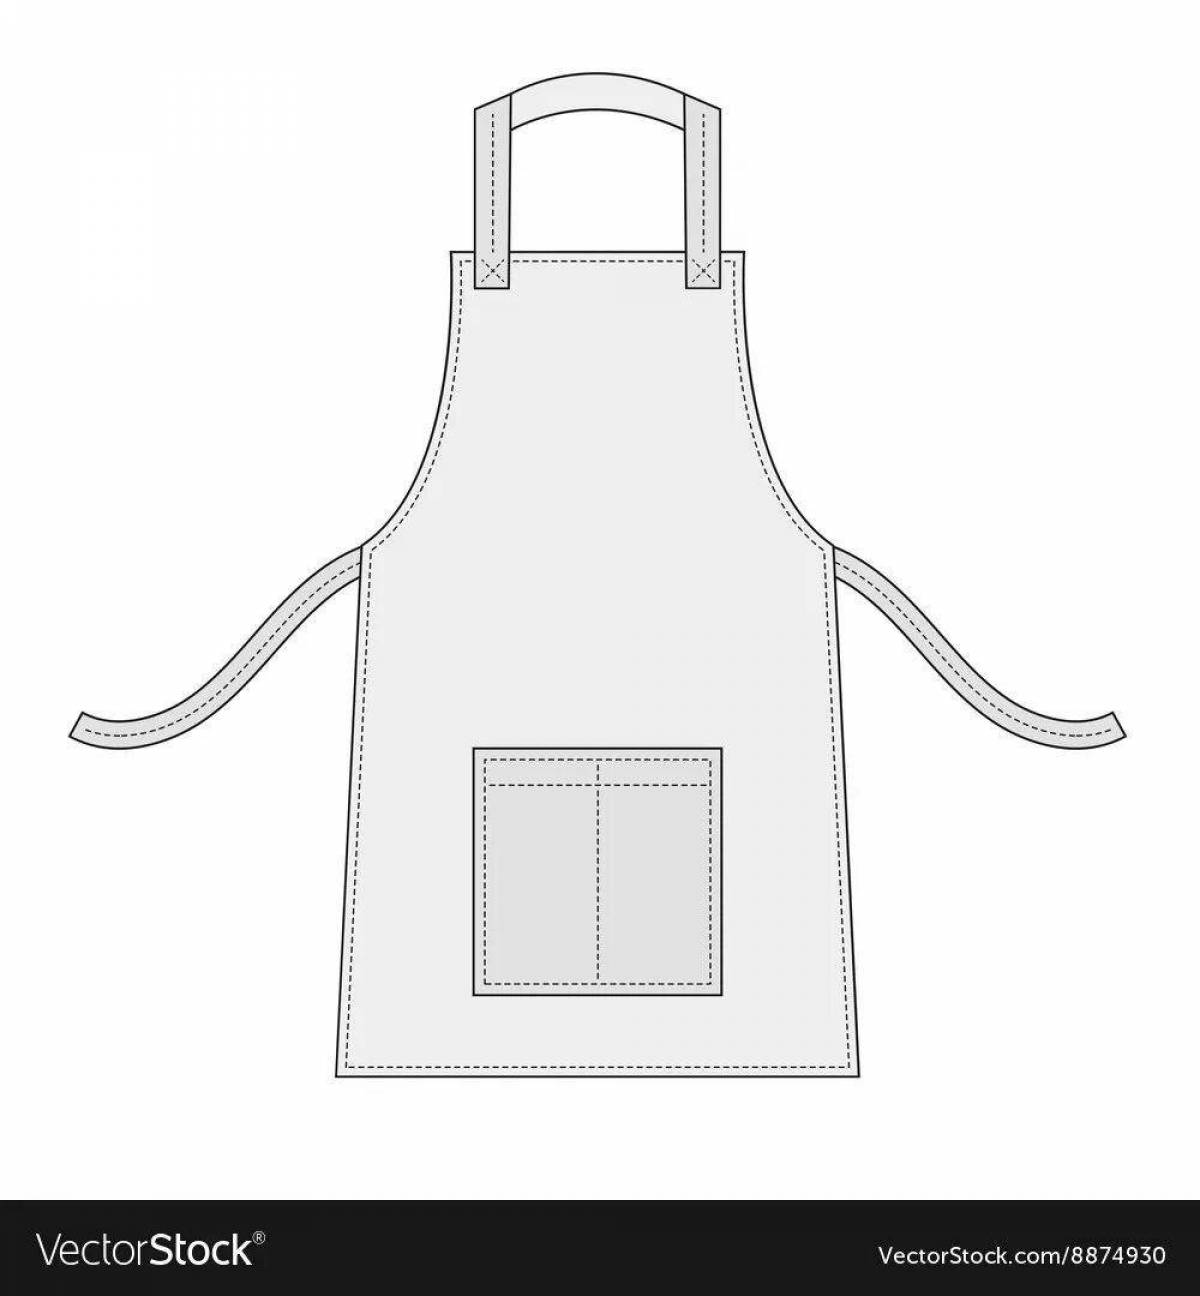 Amazing Chef's Apron coloring book for kids